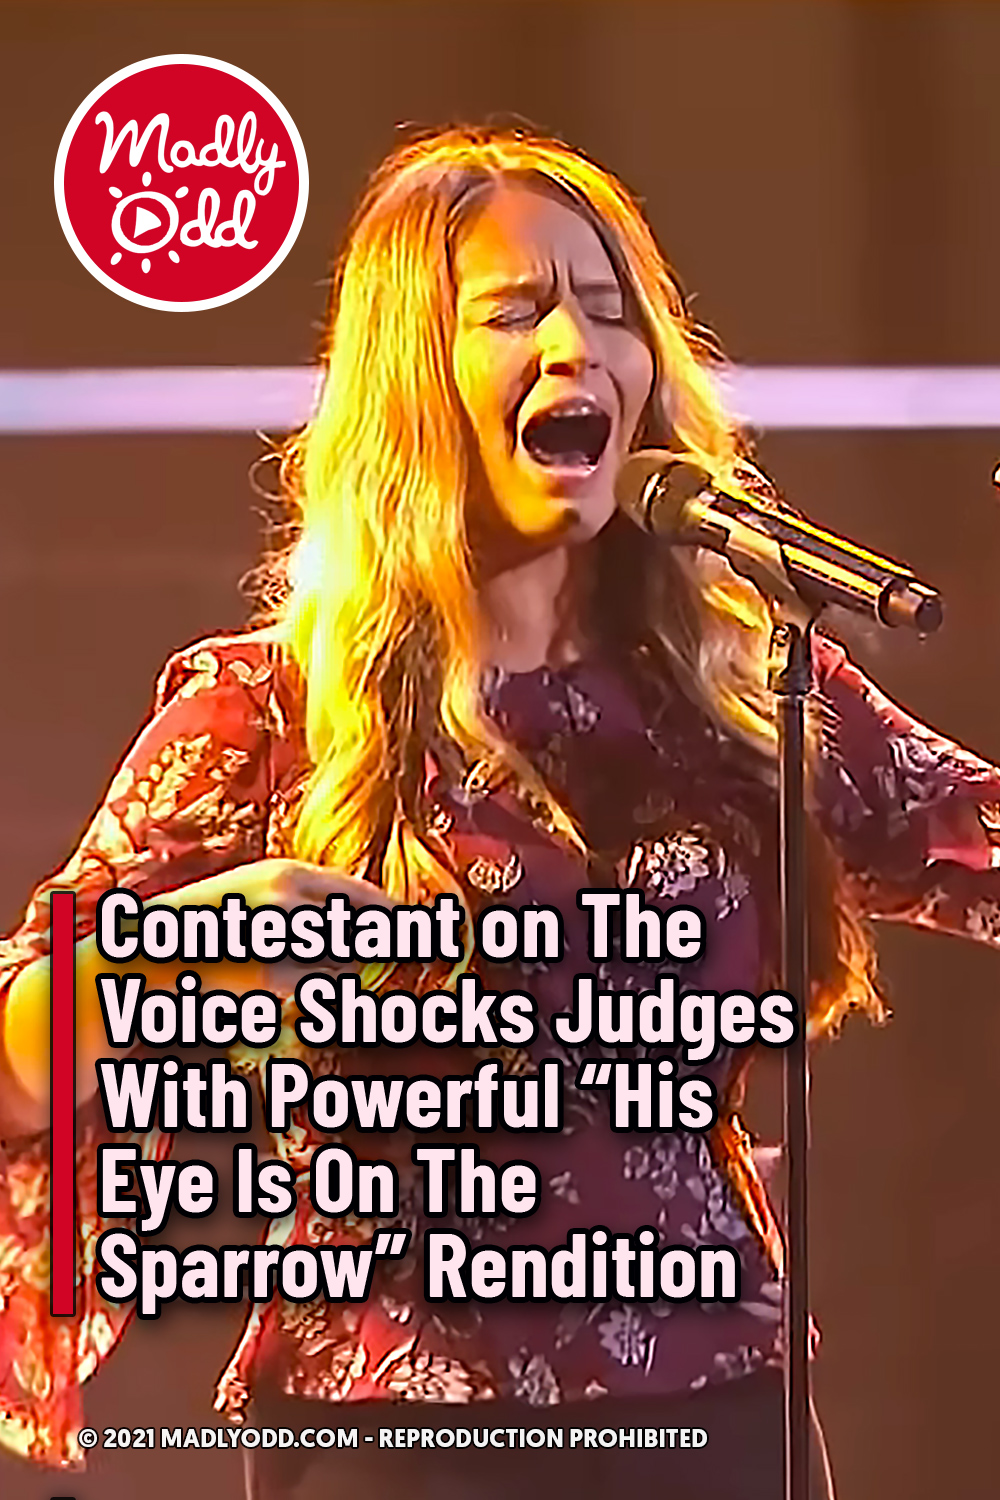 Contestant on The Voice Shocks Judges With Powerful “His Eye Is On The Sparrow” Rendition